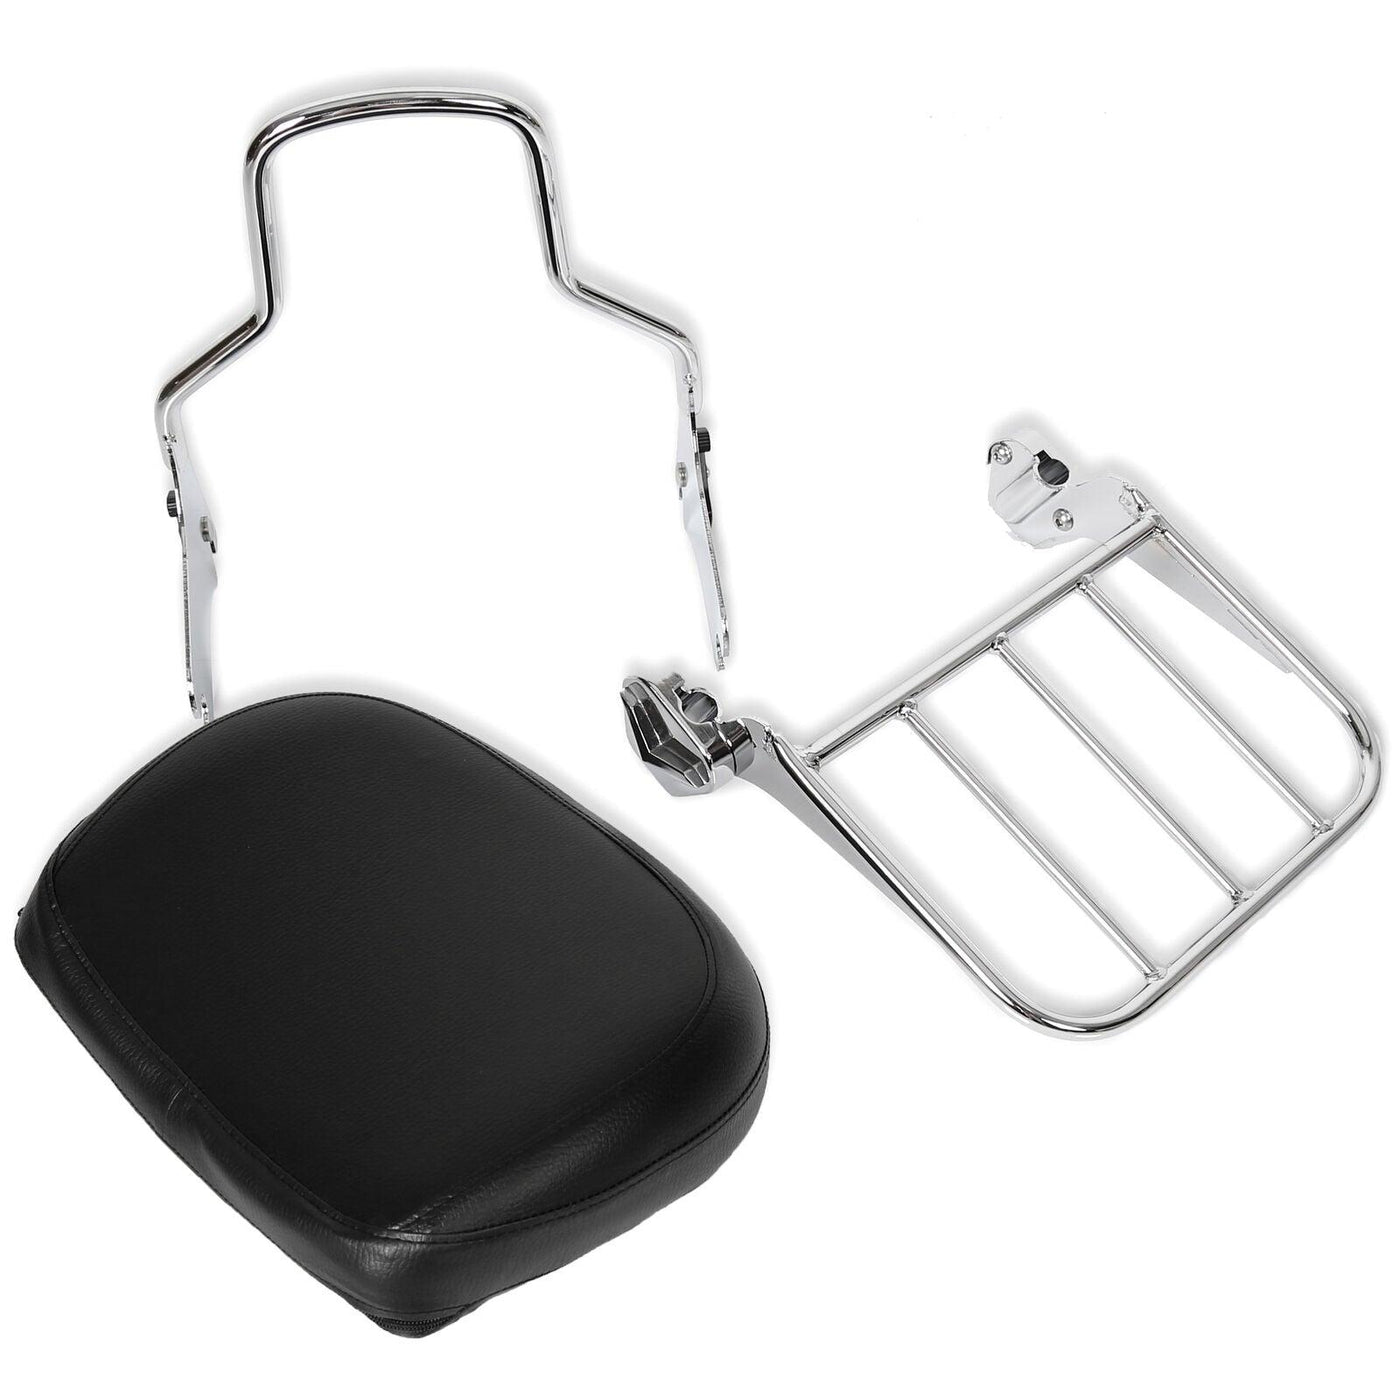 For 97-08 Detachable Sissy Bar Backrest Luggage Rack Harley Road King Electra - Moto Life Products